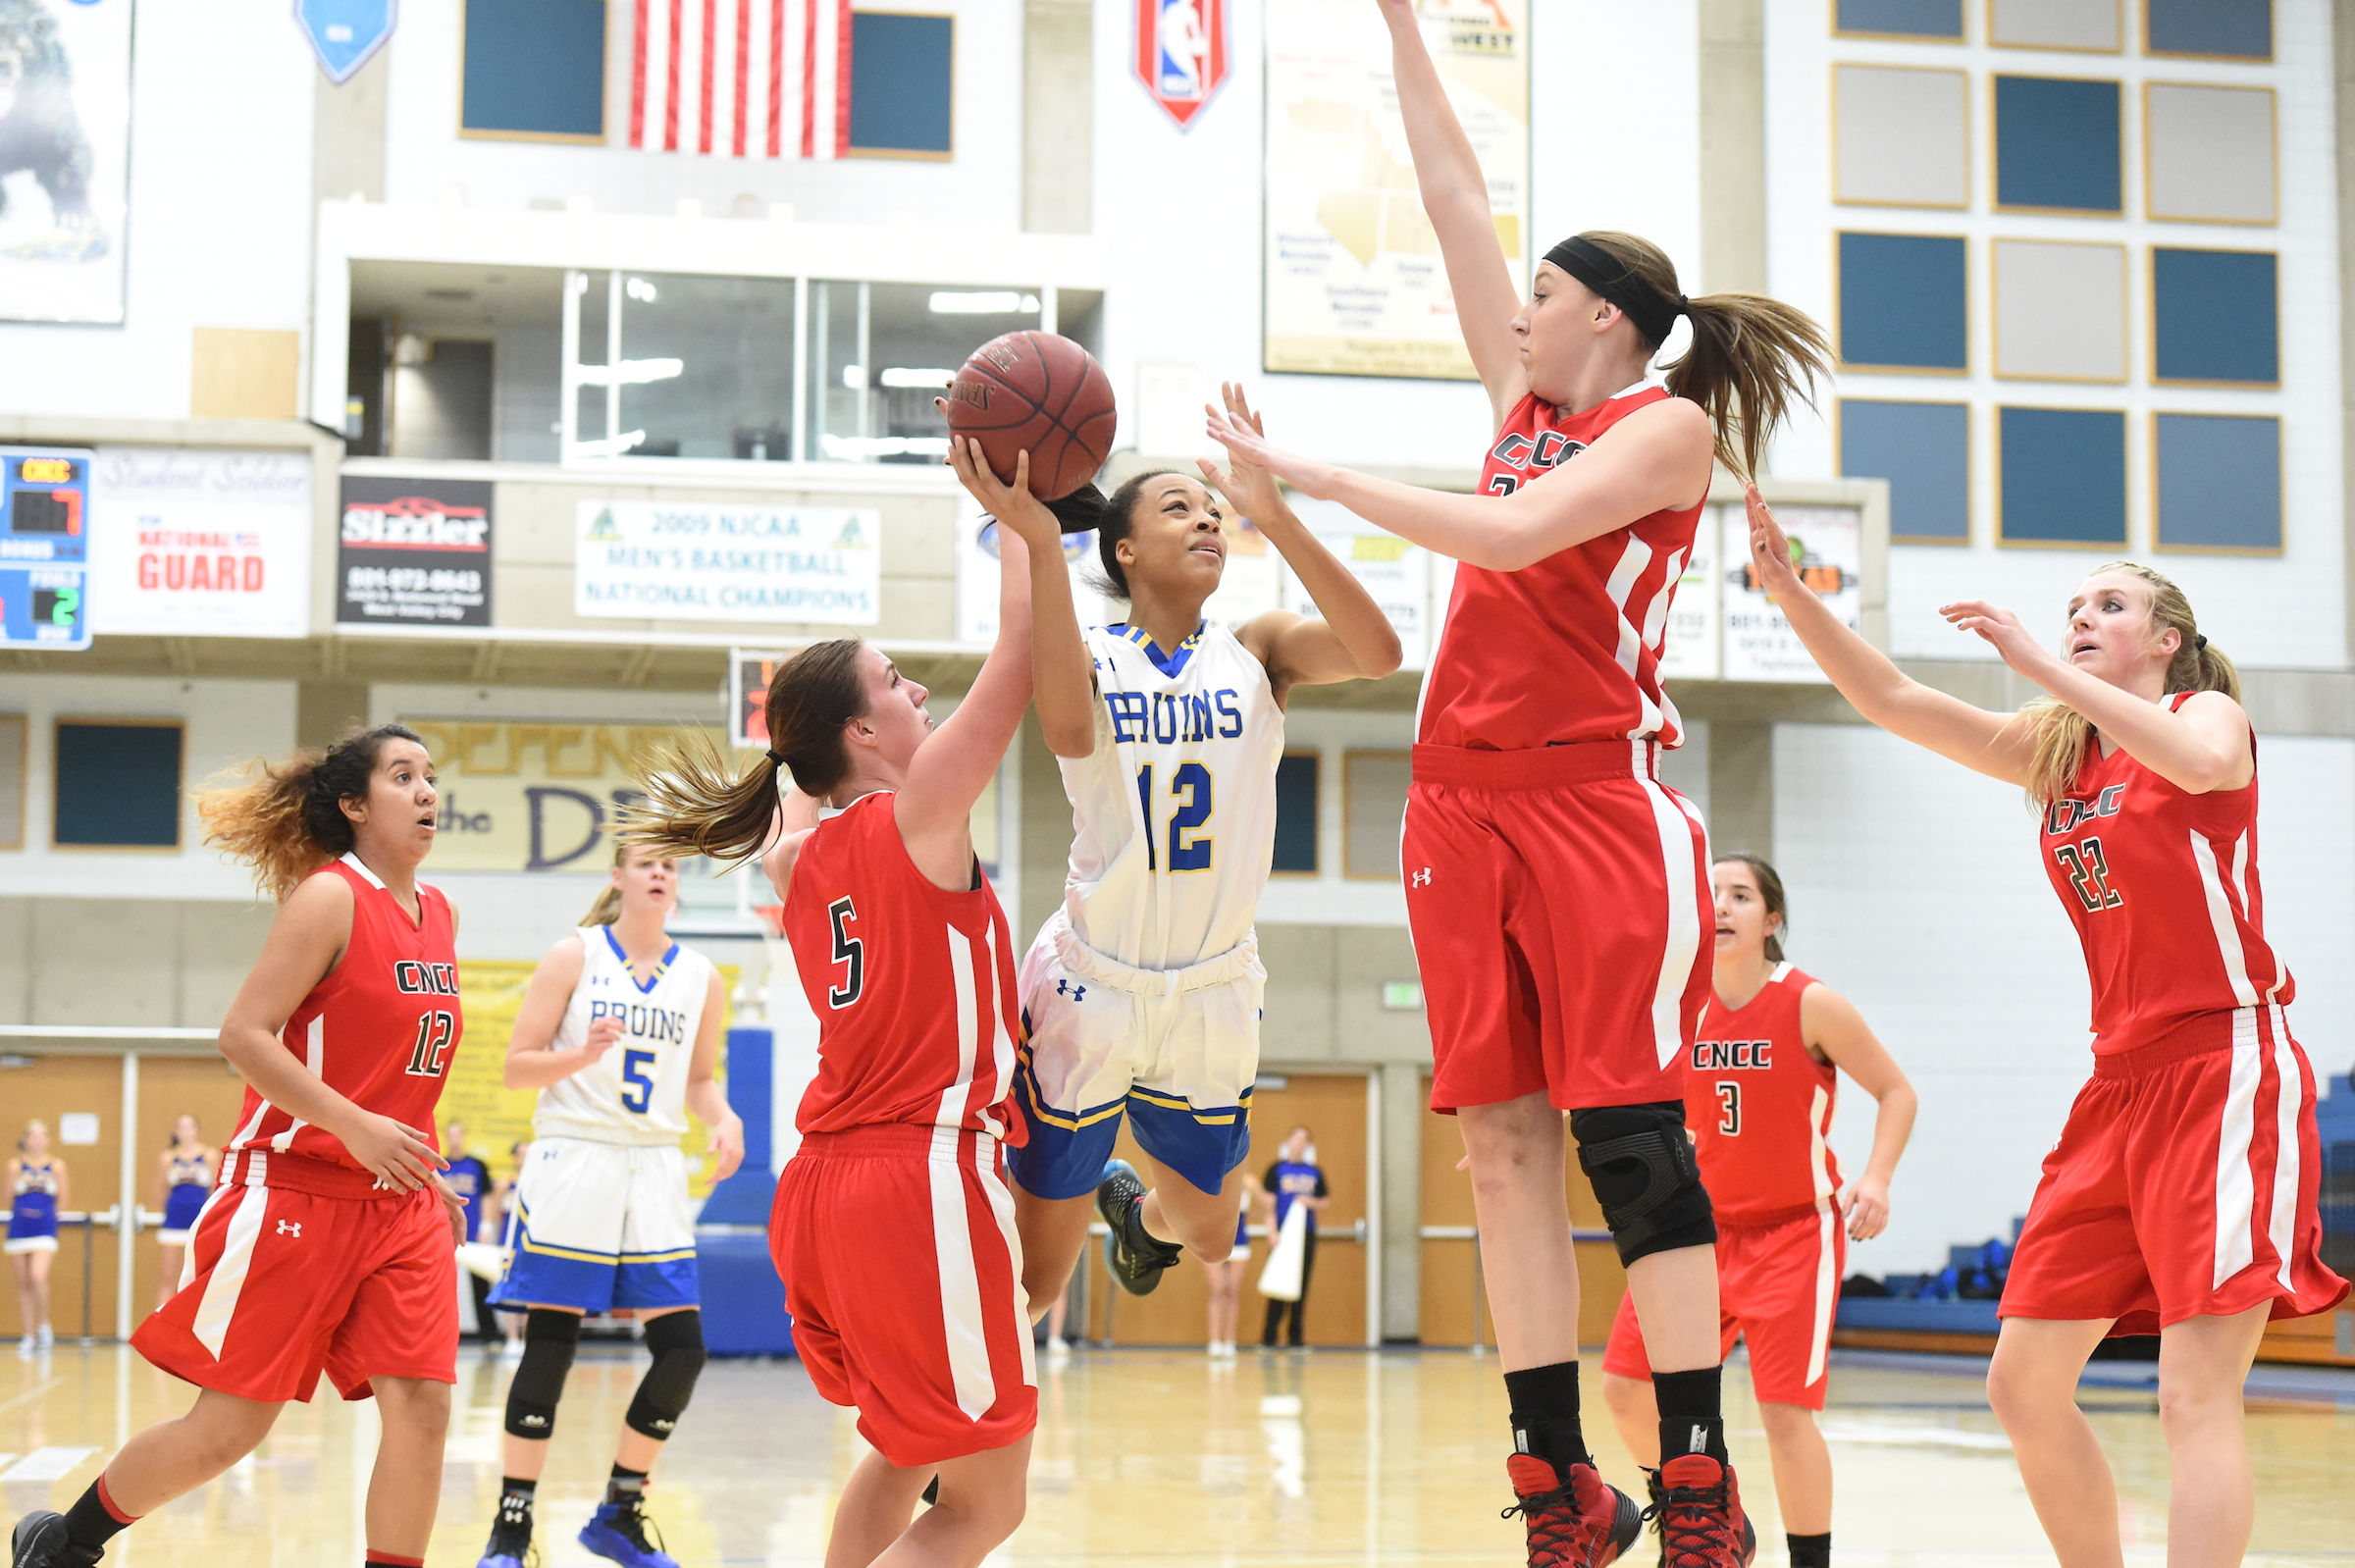 Monique Mills muscles her way toward a layup.